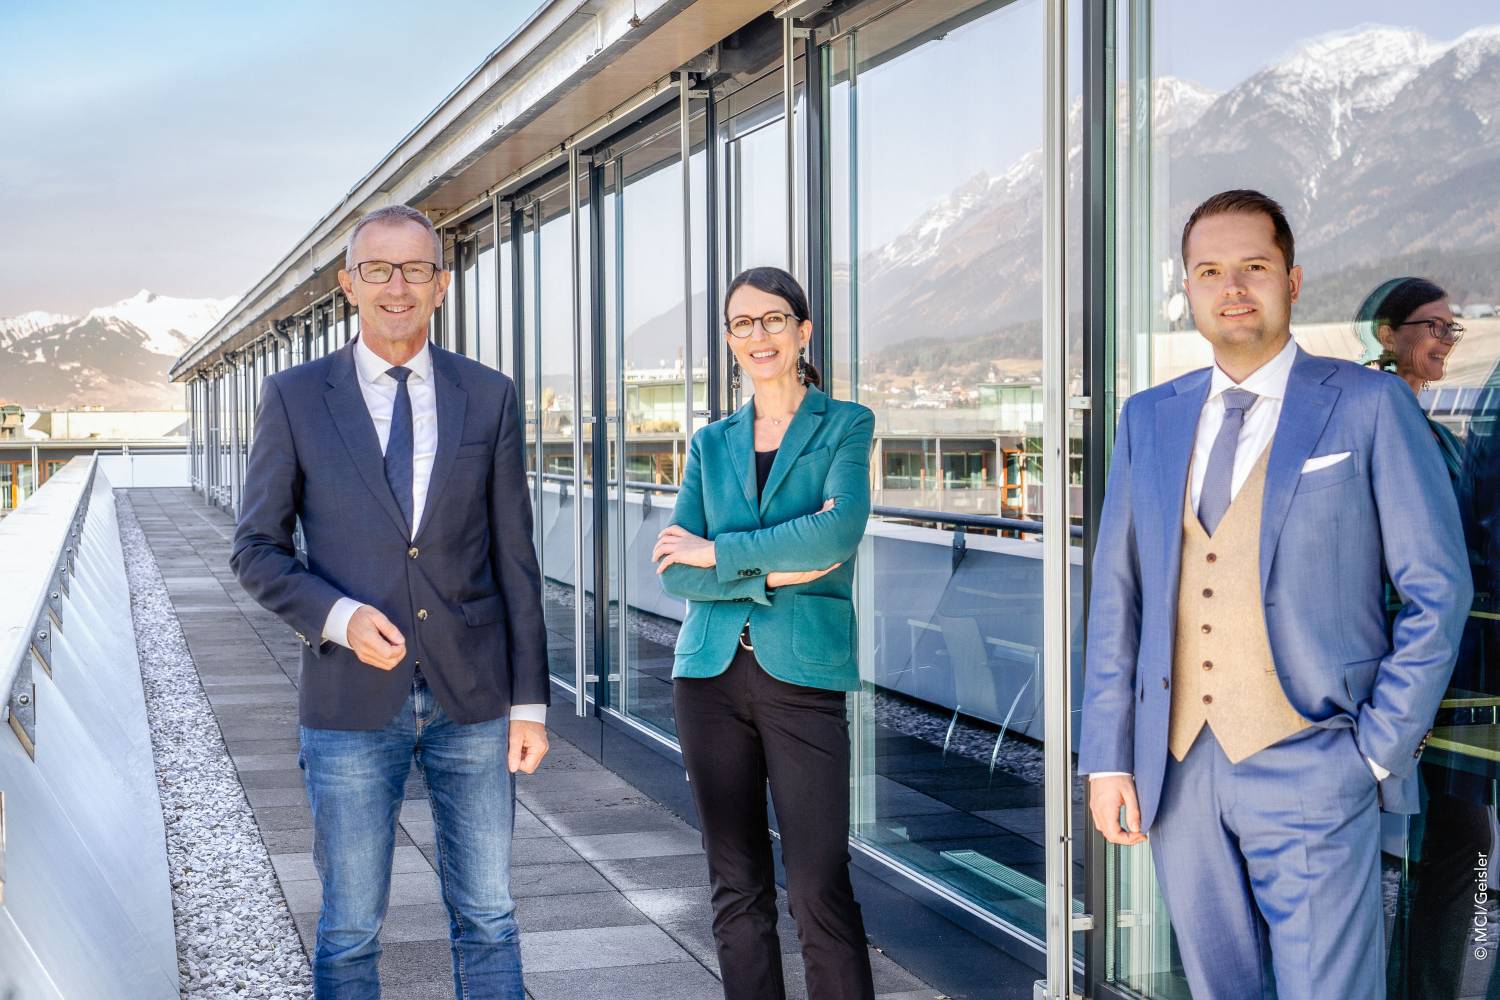 From left to right: MCI Rector Andreas Altmann, Head of Executive Education at MCI Susanne E. Herzog and Academic Director of the Master of Laws Lukas Staffler. ©MCI_Geisler